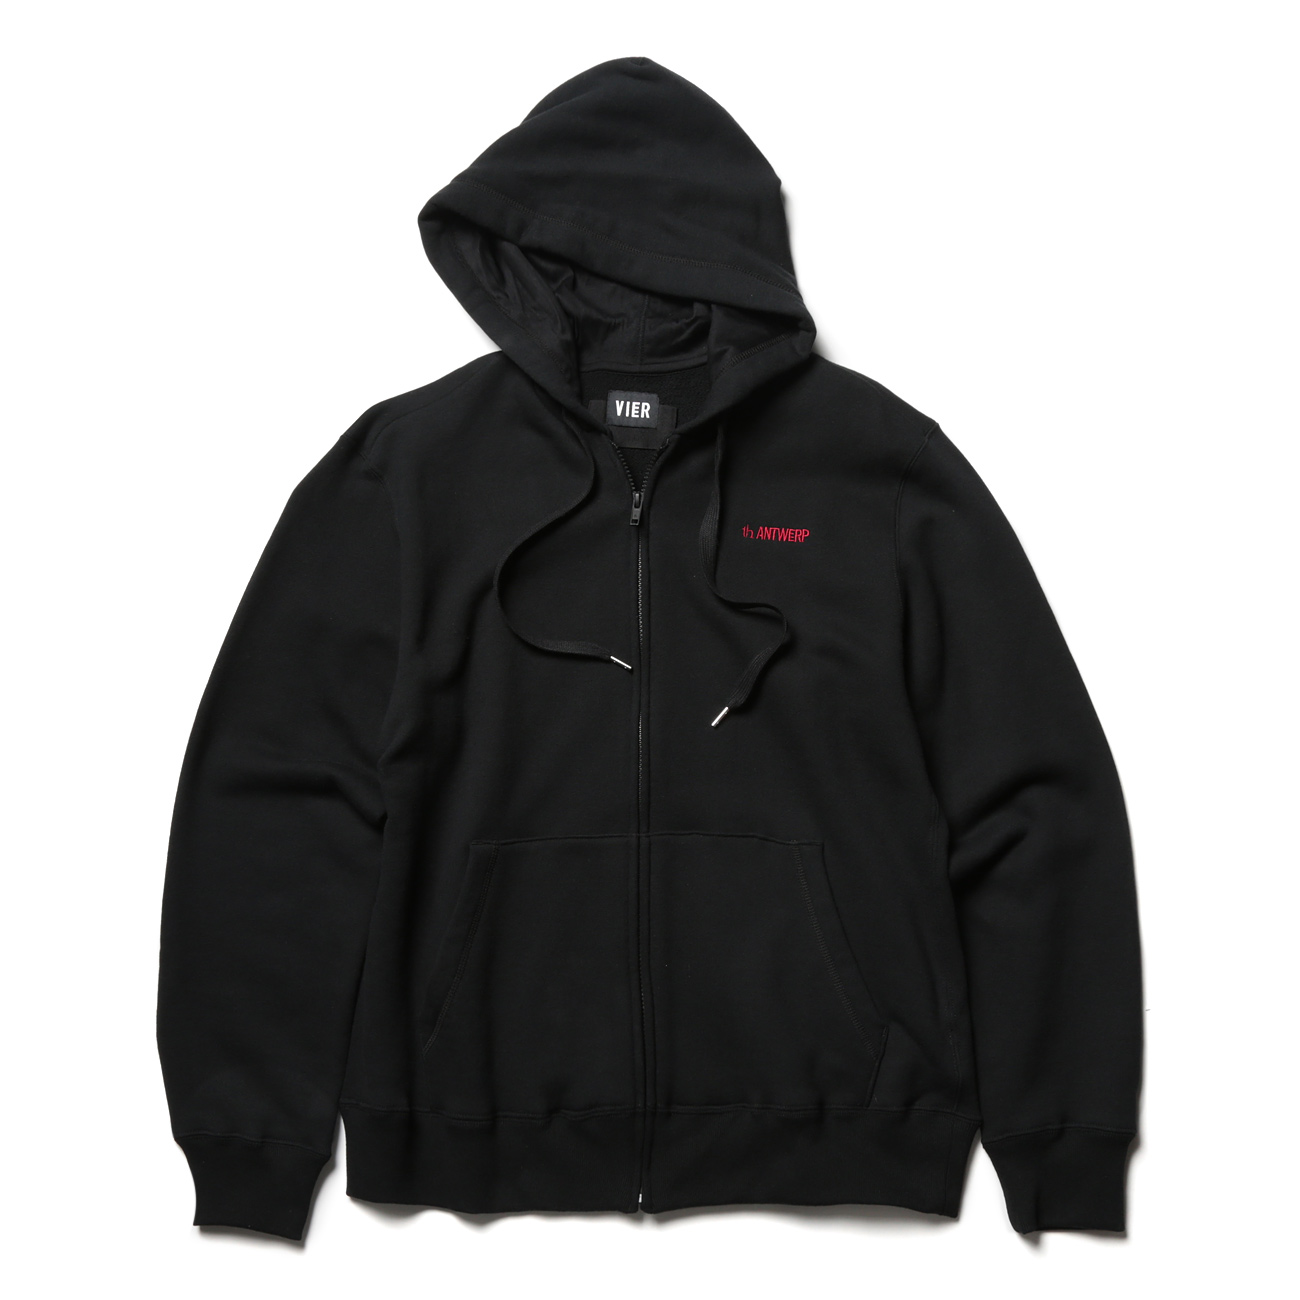 th products / ティーエイチプロダクツ | VIER Hooded Parker - Black